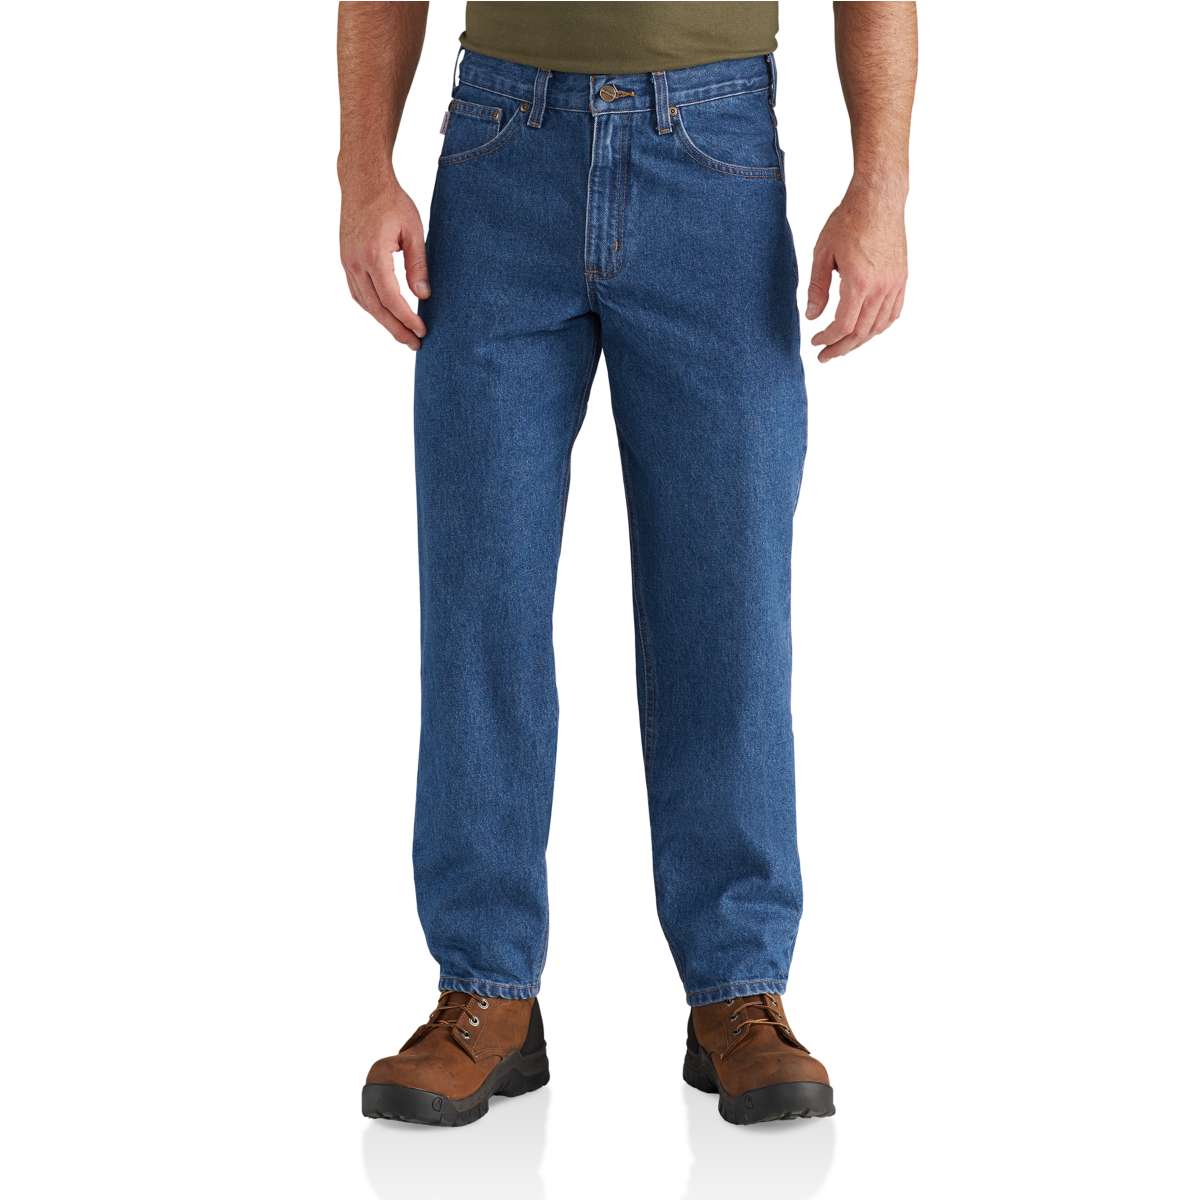 B17 - Carhartt Men's  Relaxed Fit Heavyweight 5 Pocket Tapered Jean